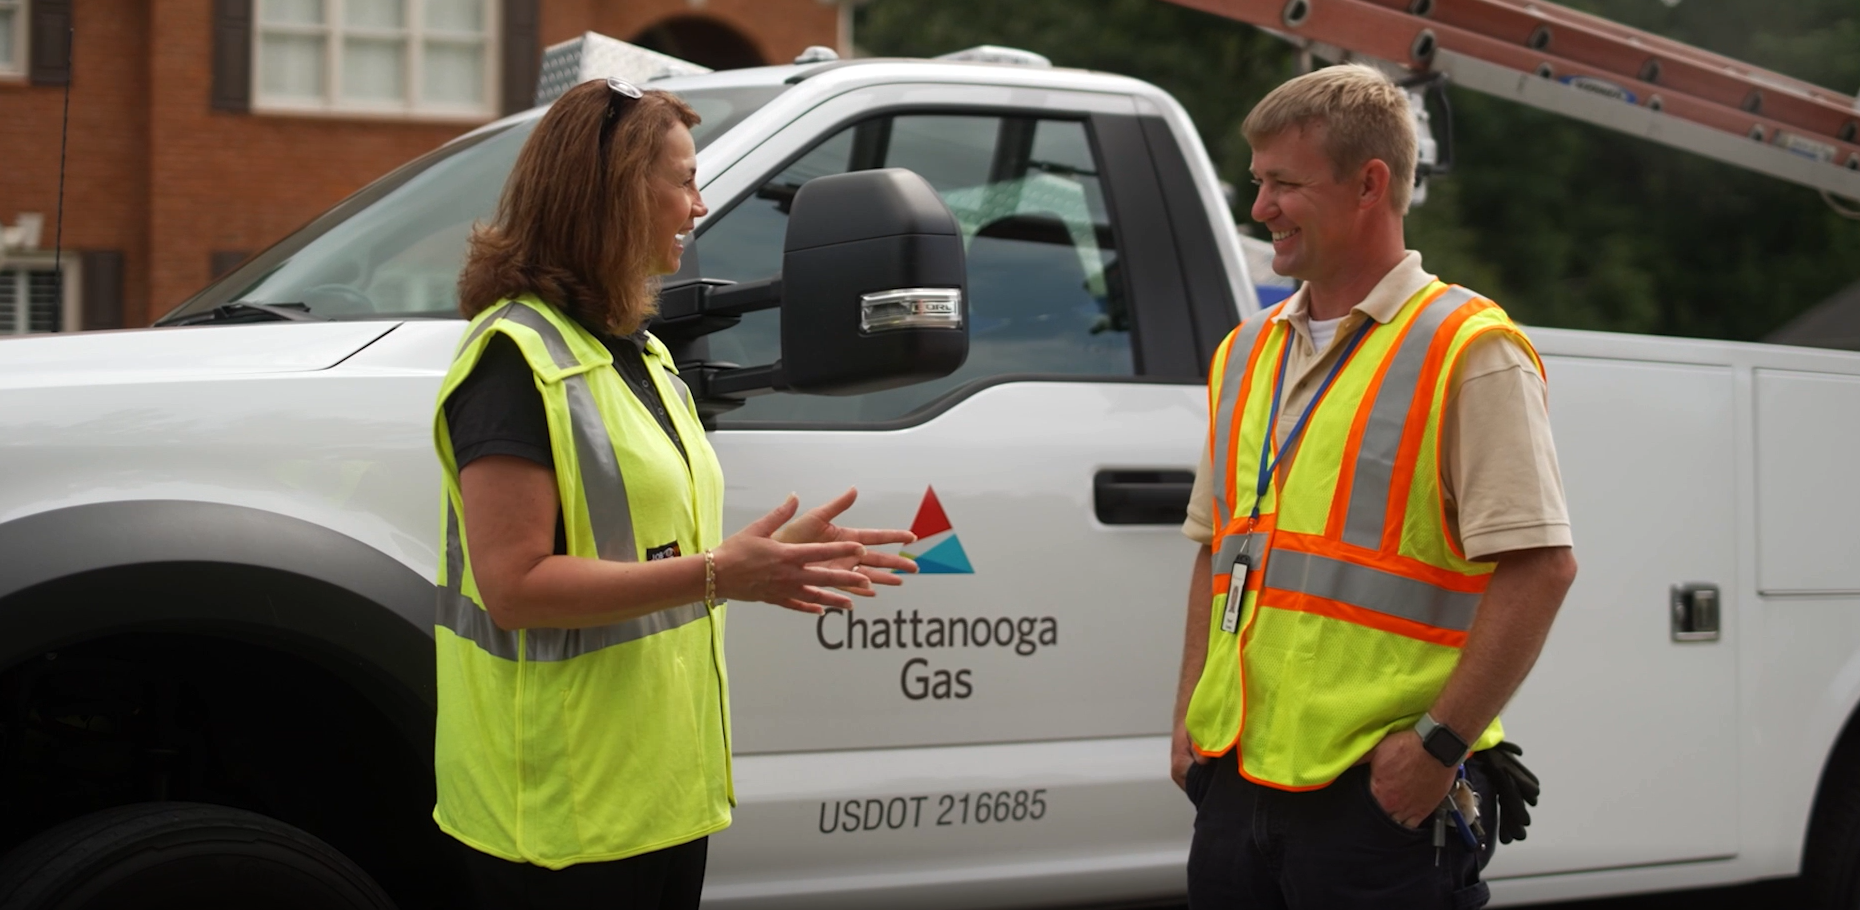 Southern Company Gas Chairman, President & CEO Kim Greene and Robert Conway, a large meter specialist, stand beside a Chattanooga Gas work truck before a ride-along, in which gas service was activated for a new customer.  